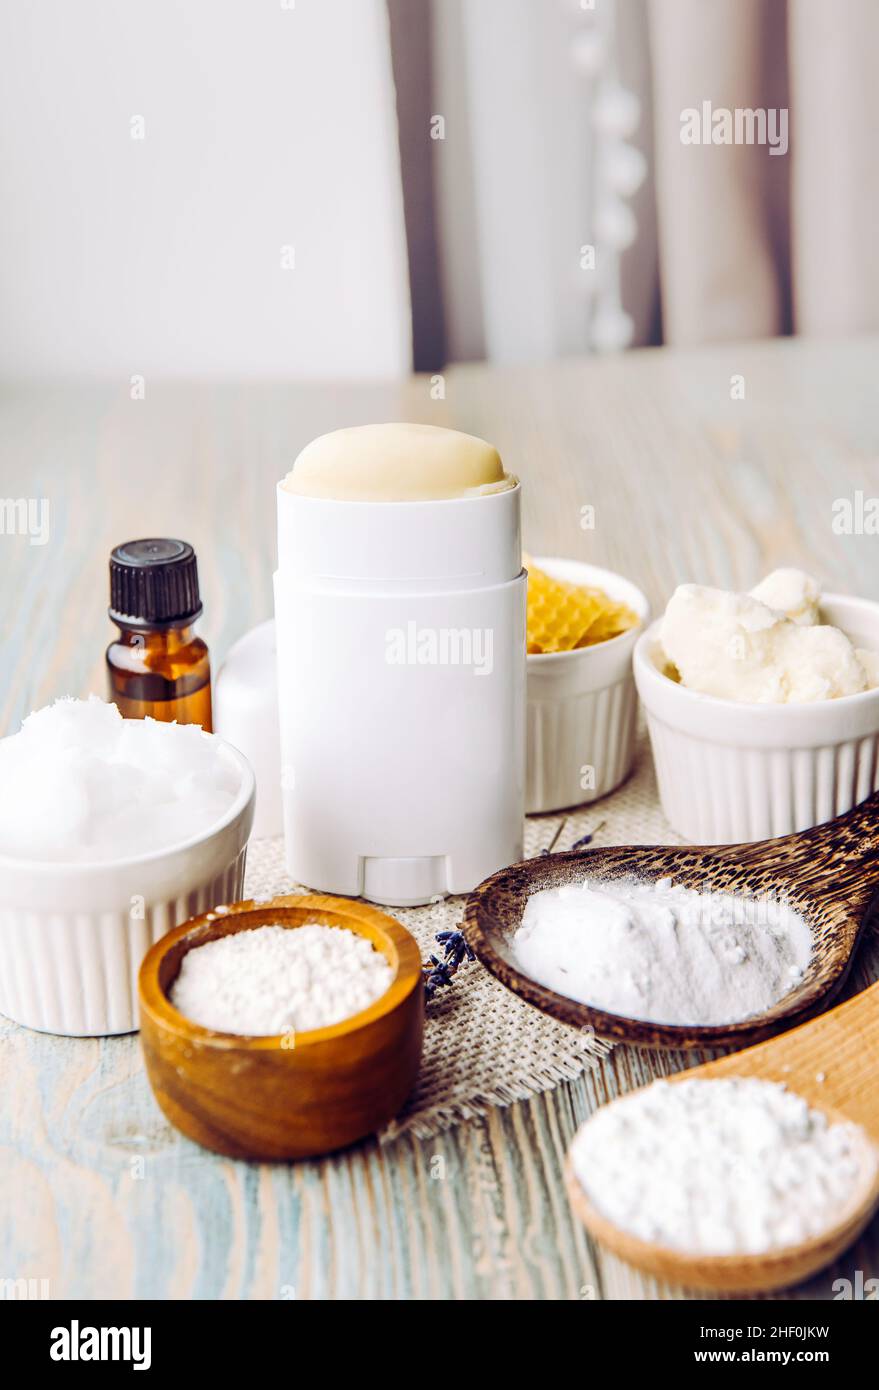 Making homemade deodorant stick with all natural ingredients concept.  Wooden background. Ingredients: arrowroot powder, baking soda, beeswax  Stock Photo - Alamy